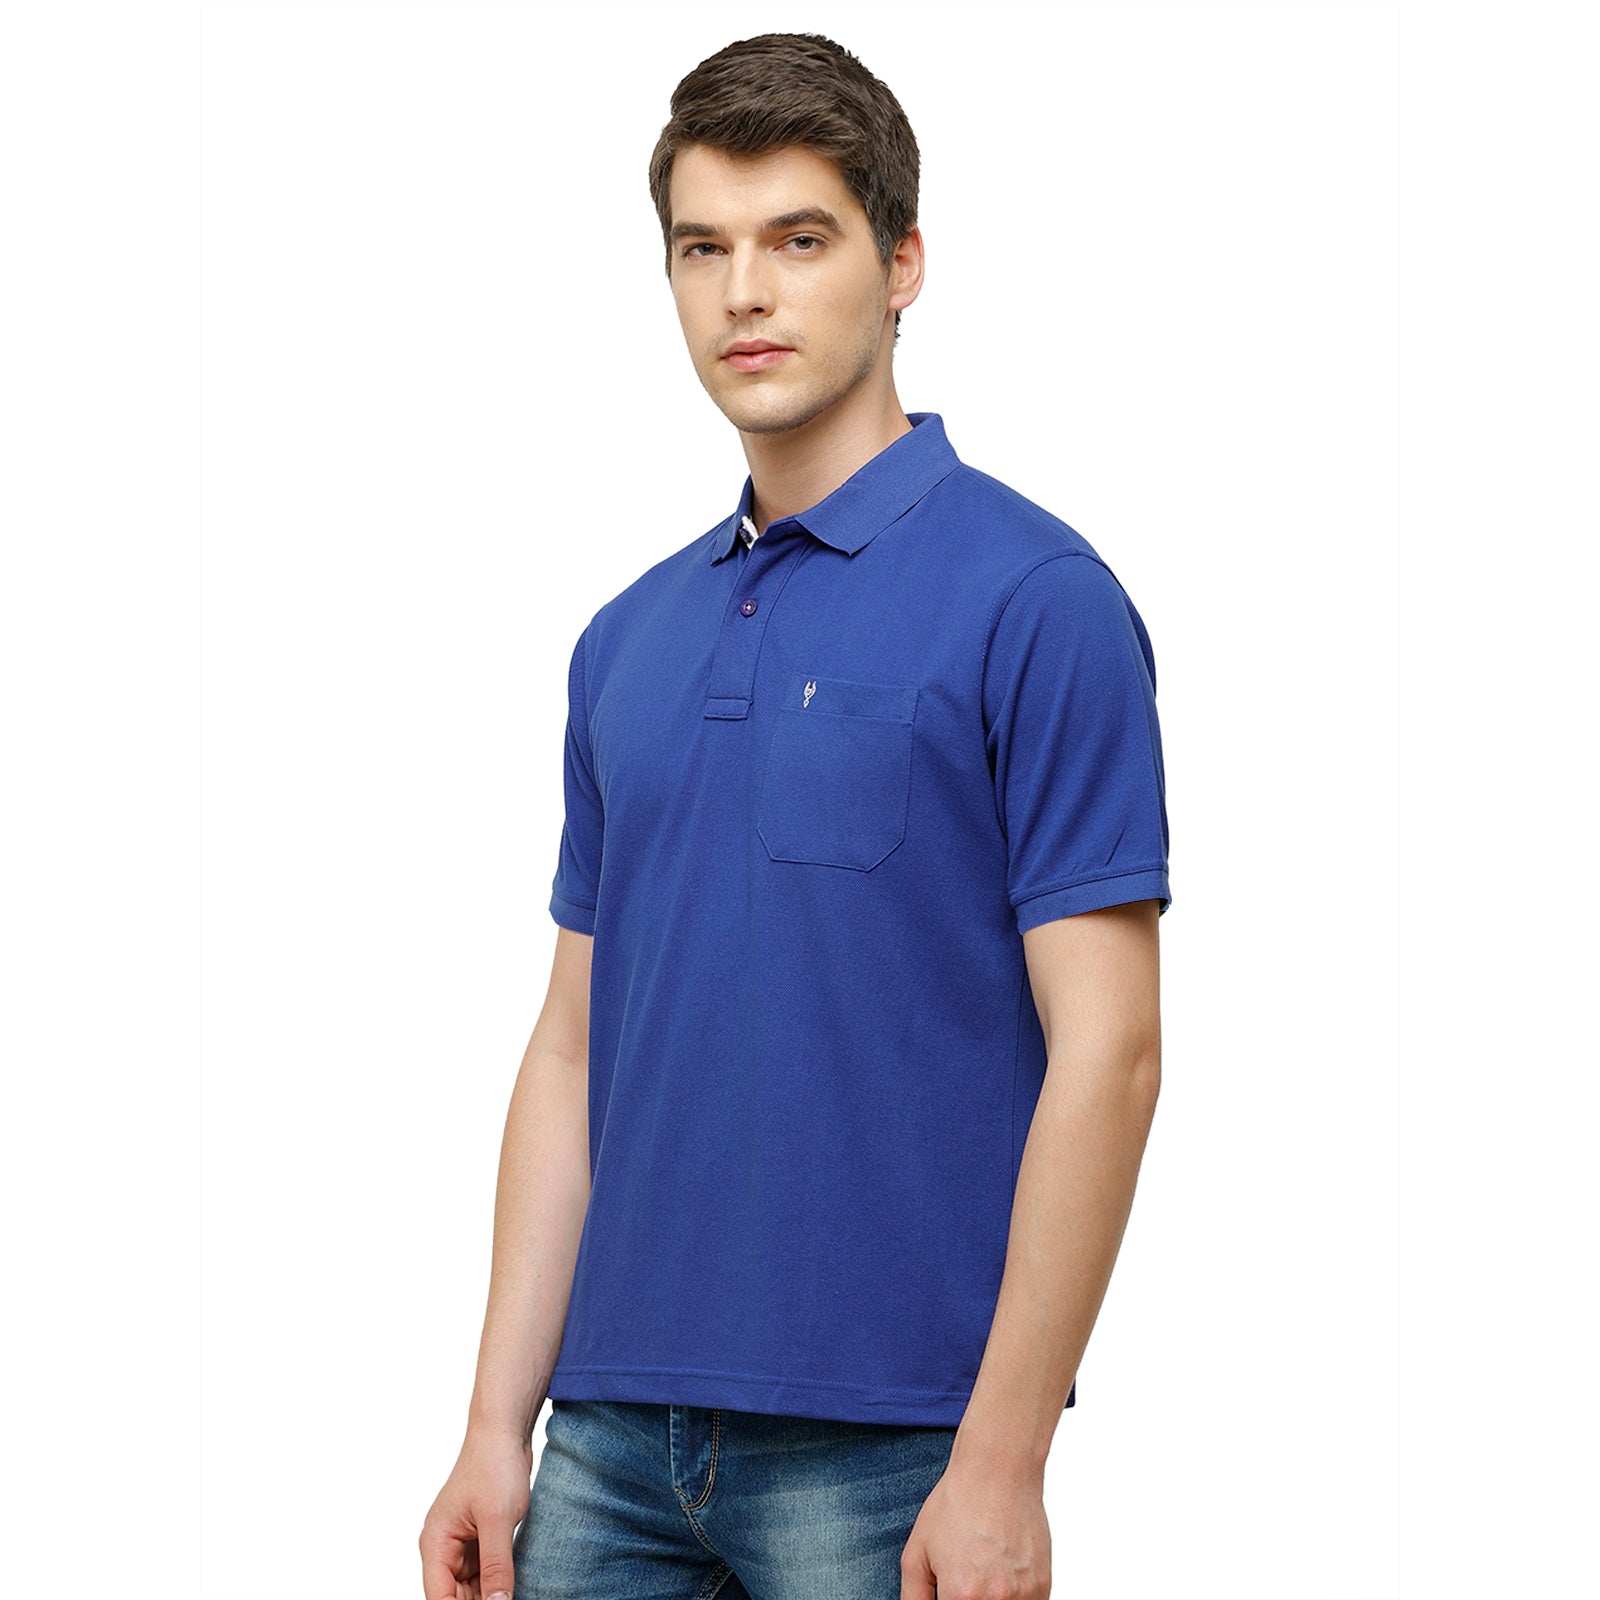 Classic Polo Navy Blue Polo Neck Authentic Fit T Shirt Men - 4SSN 204 T-shirt Classic Polo 